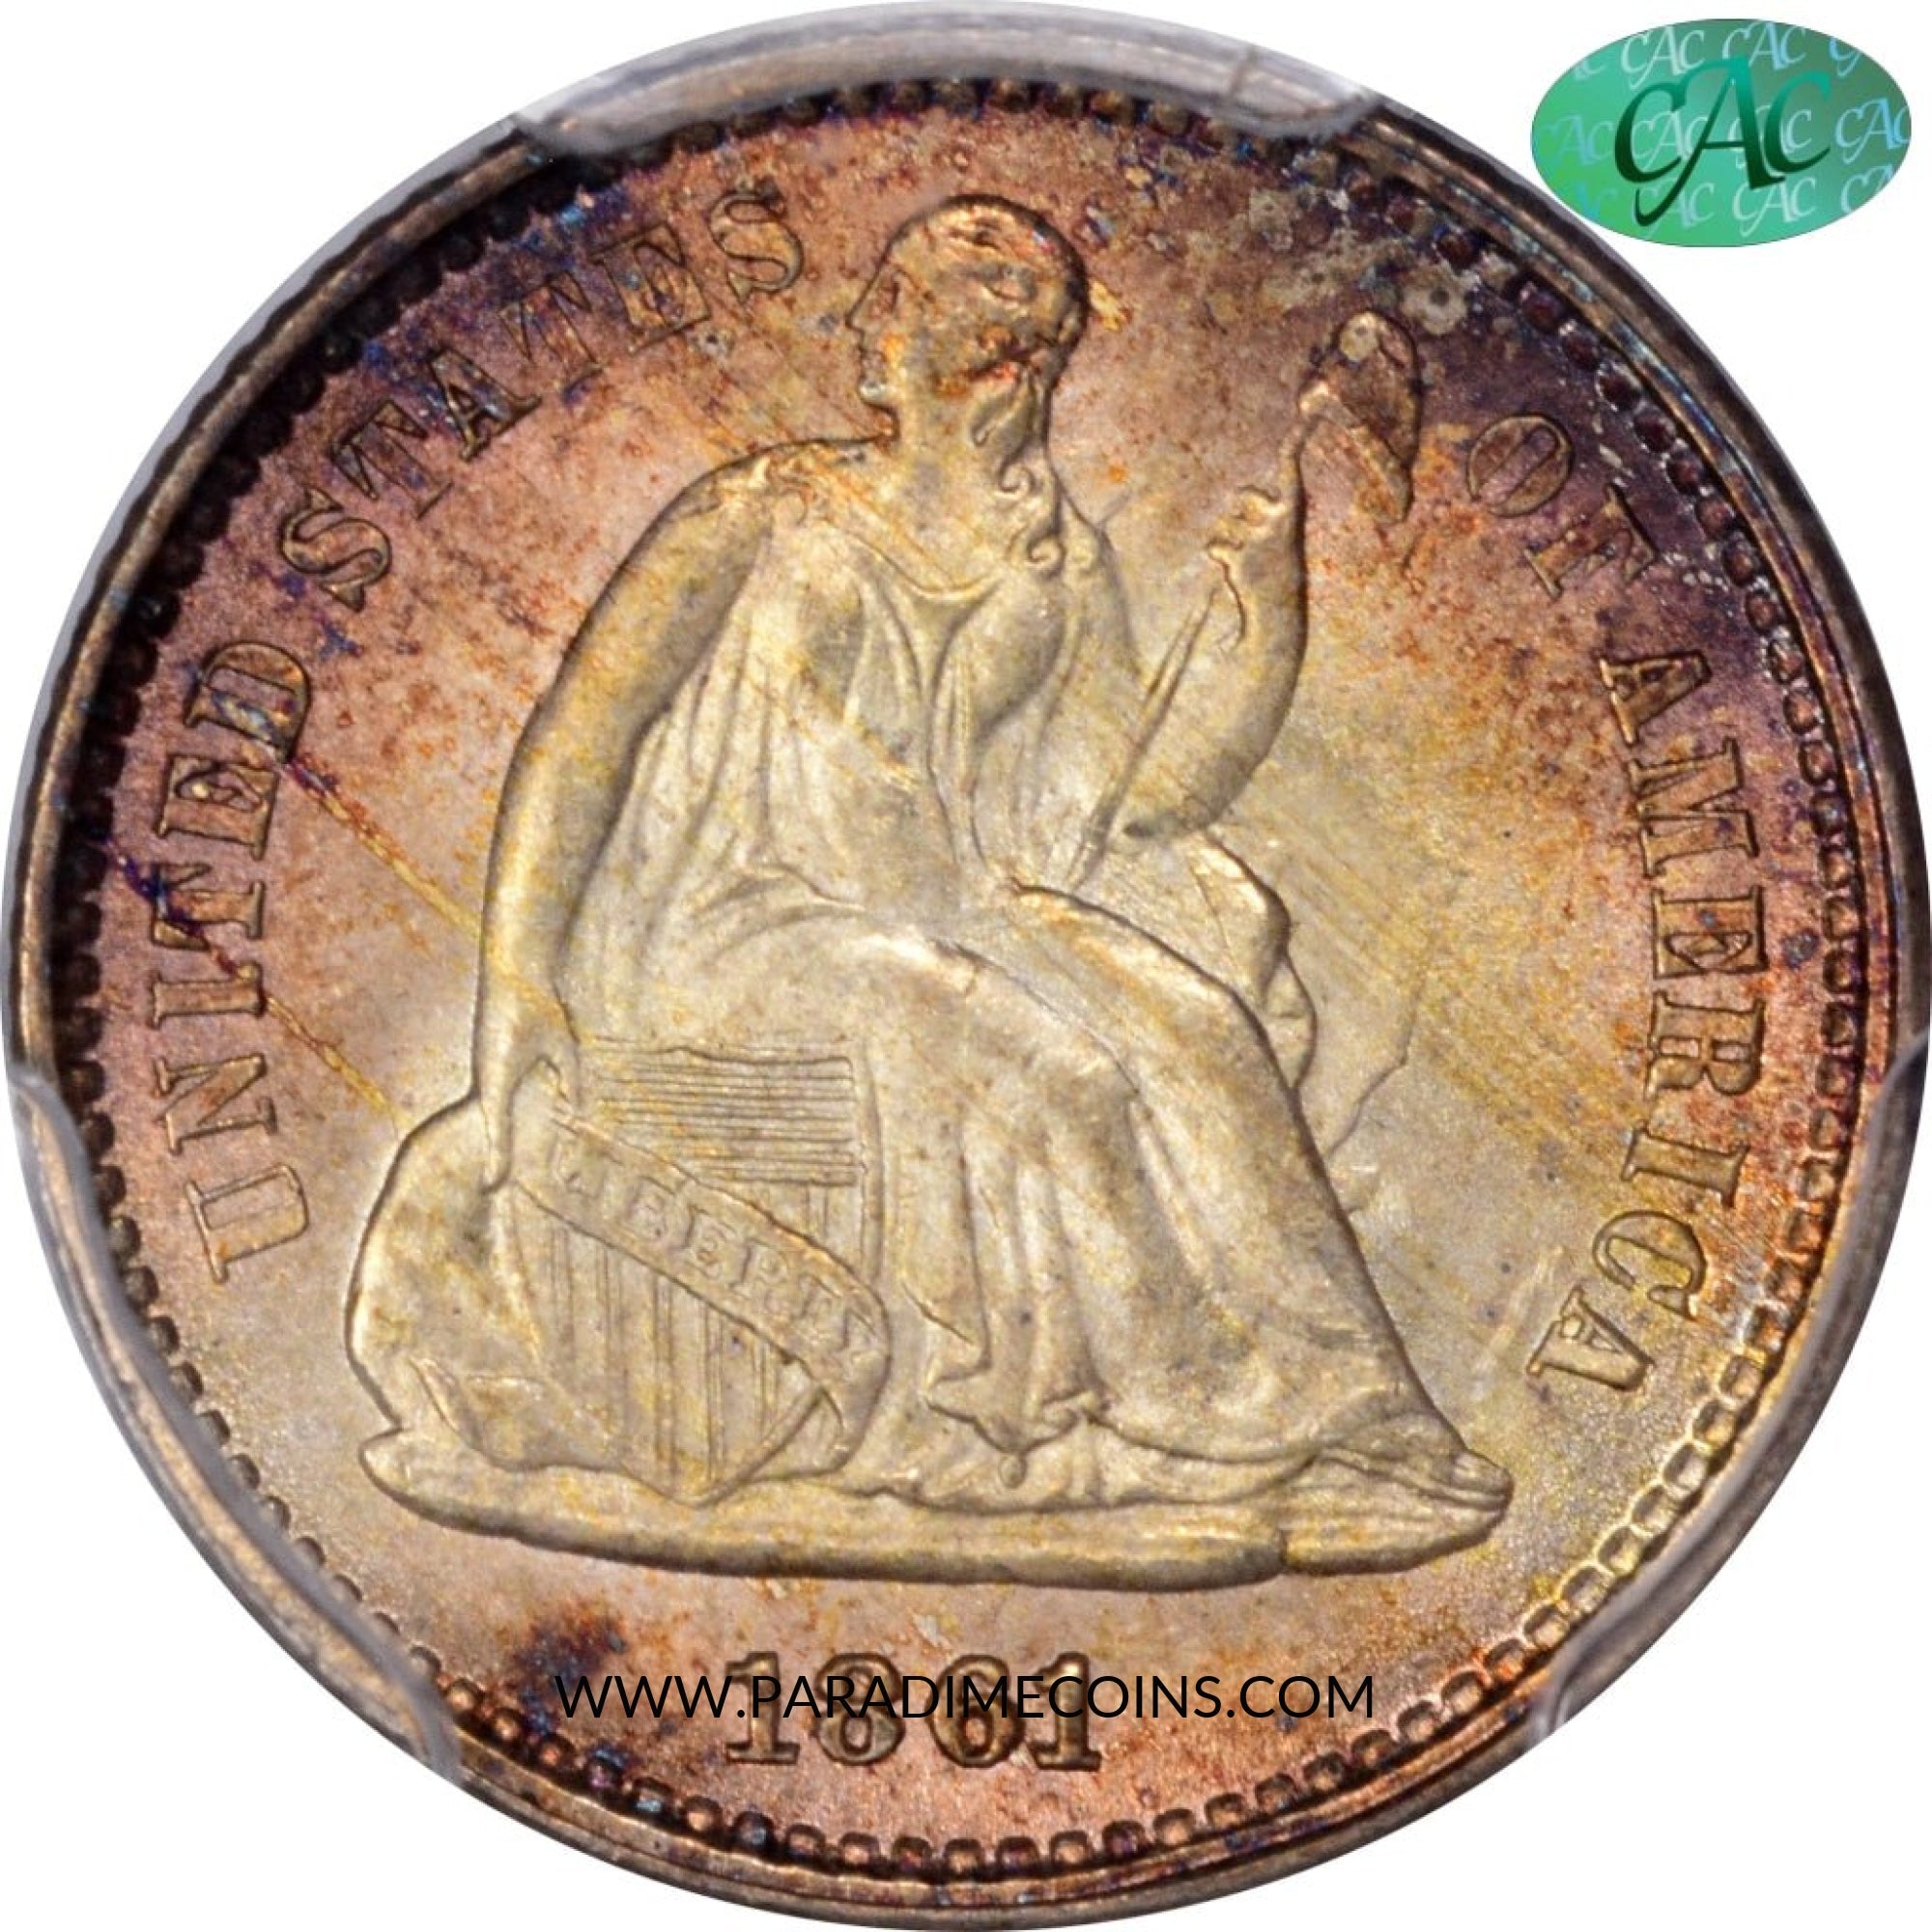 1861/0 H10C MS66+ PCGS CAC - Paradime Coins | PCGS NGC CACG CAC Rare US Numismatic Coins For Sale